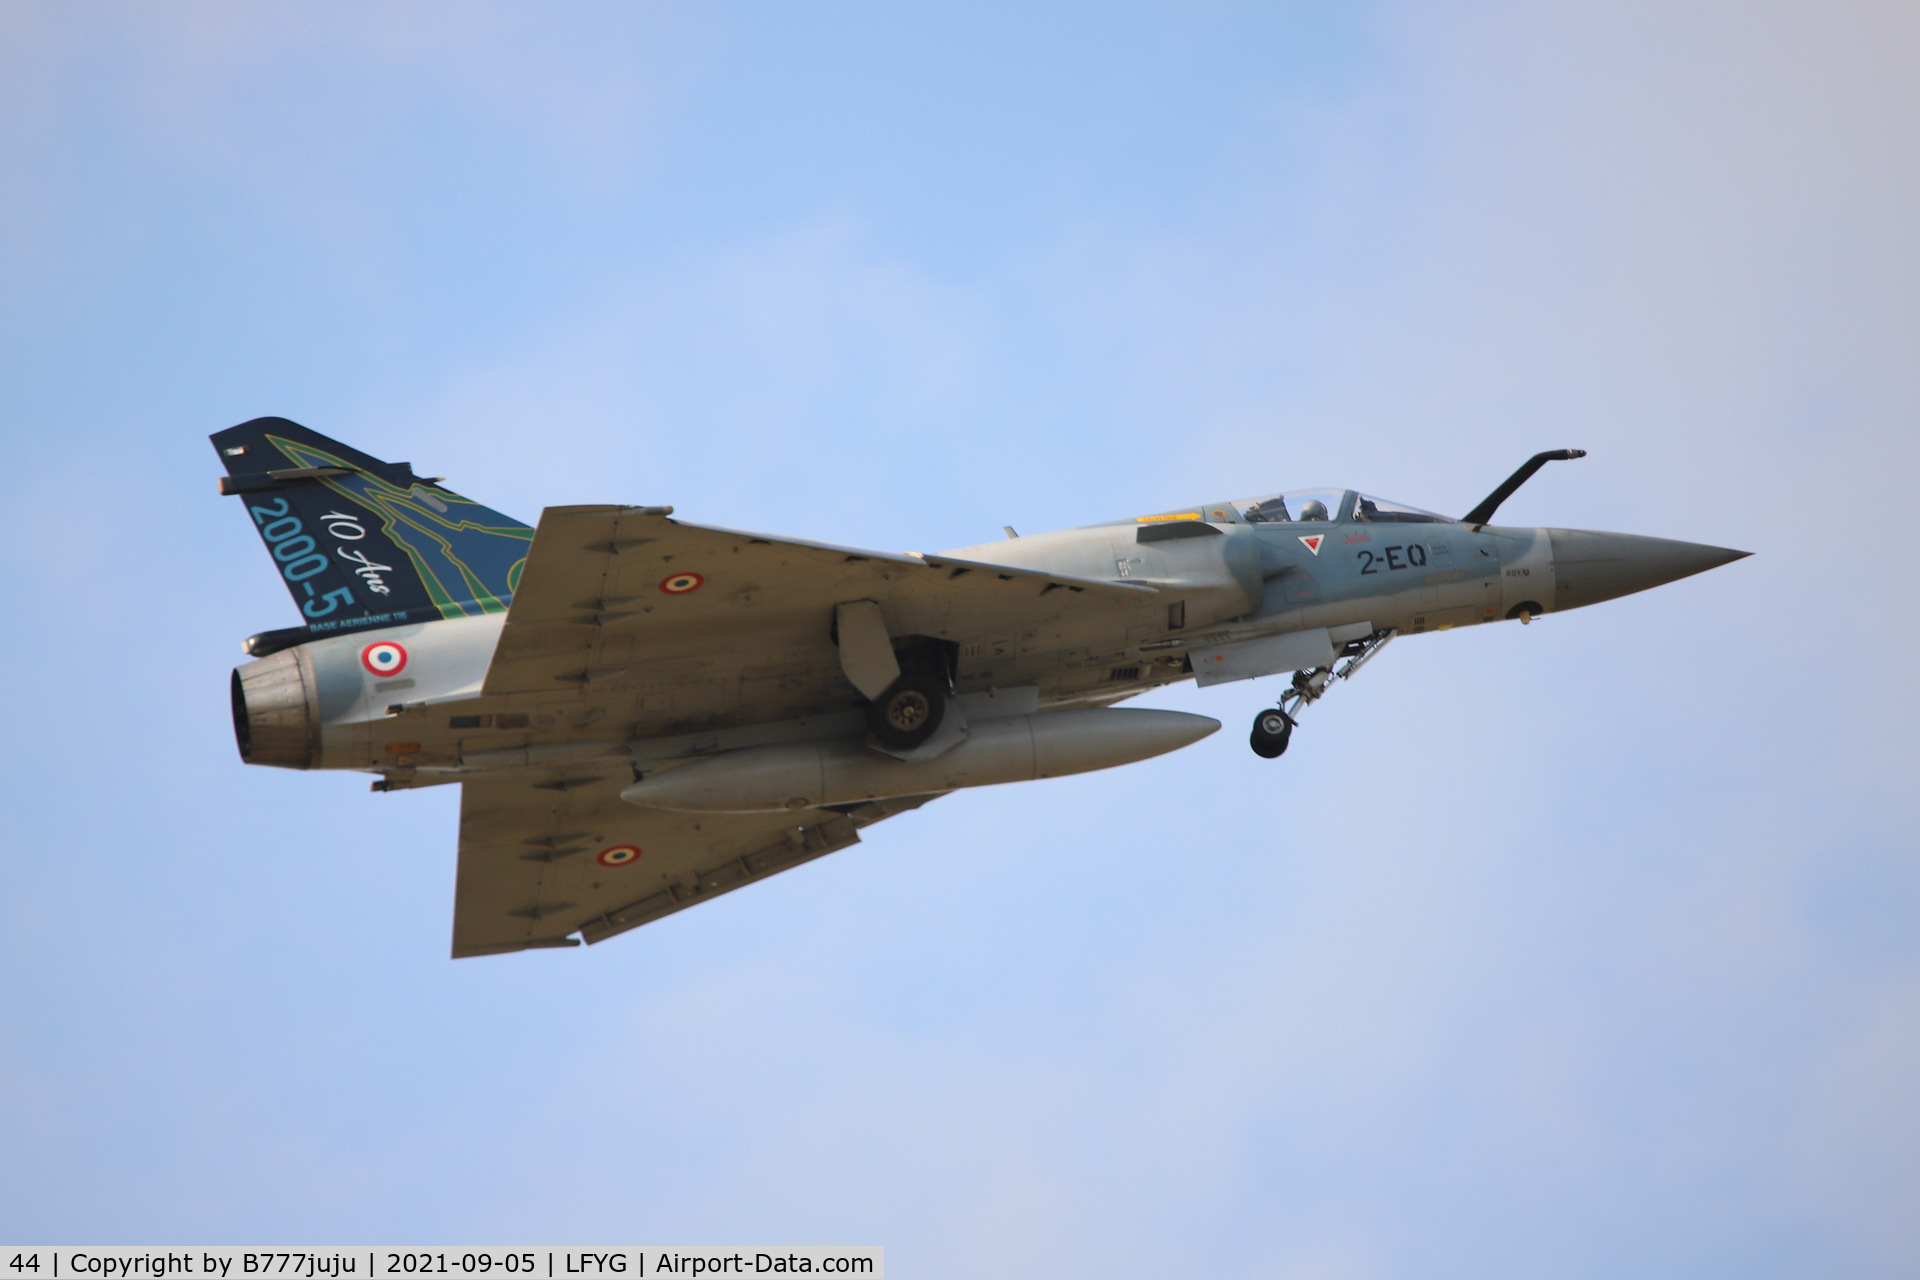 44, Dassault Mirage 2000-5F C/N 208, Cambrai airshow 2021
special deco for 10 years 2000-5
new code 2-EQ